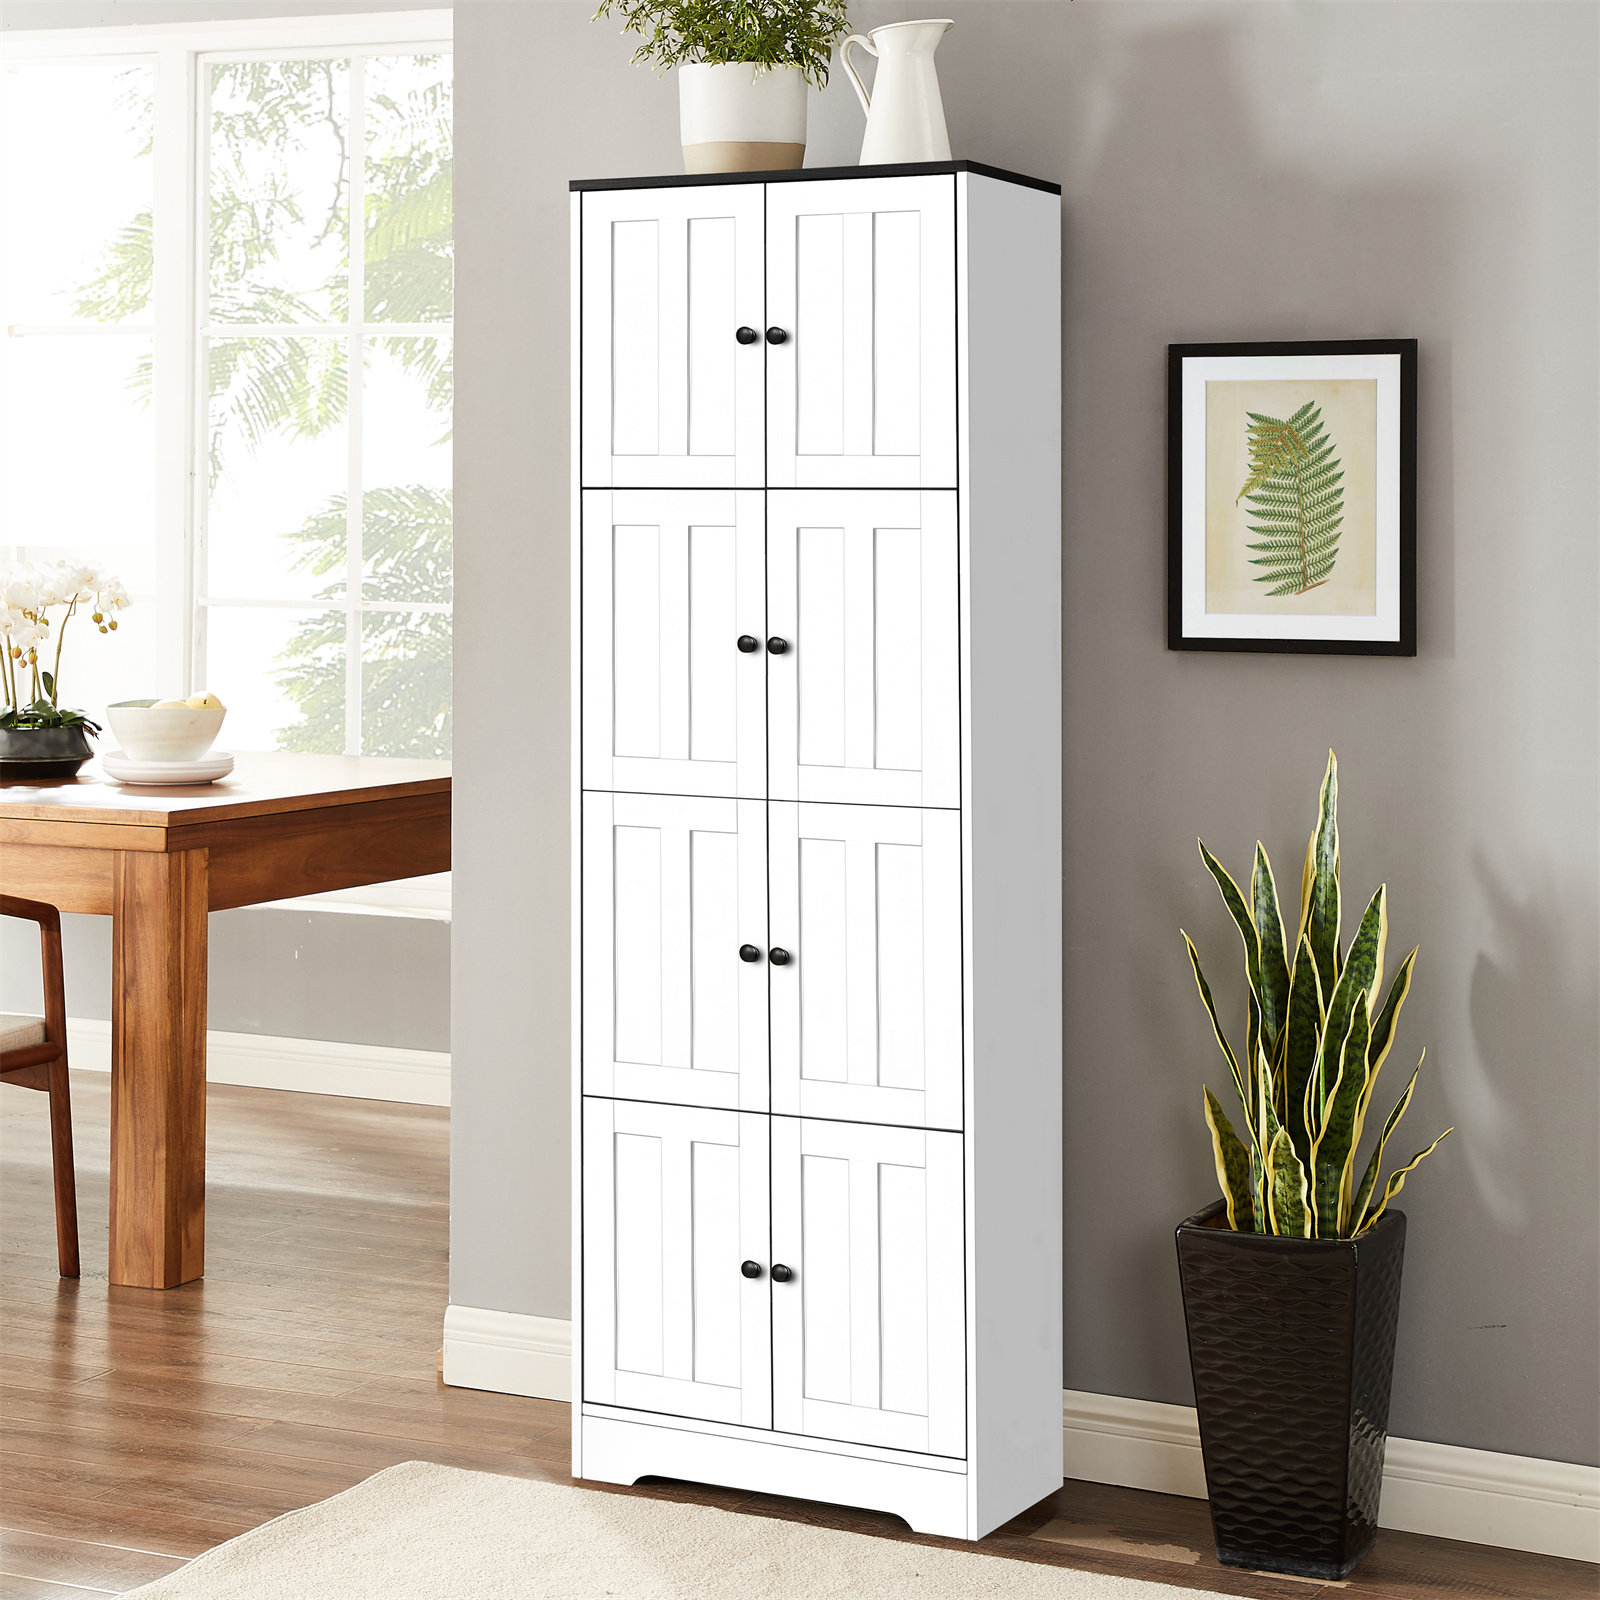 Tall Storage Cabinet with 4 Doors and 4 Shelves for Living Room, Kitchen, Office, Bedroom, Bathroom 17 Stories Color: White